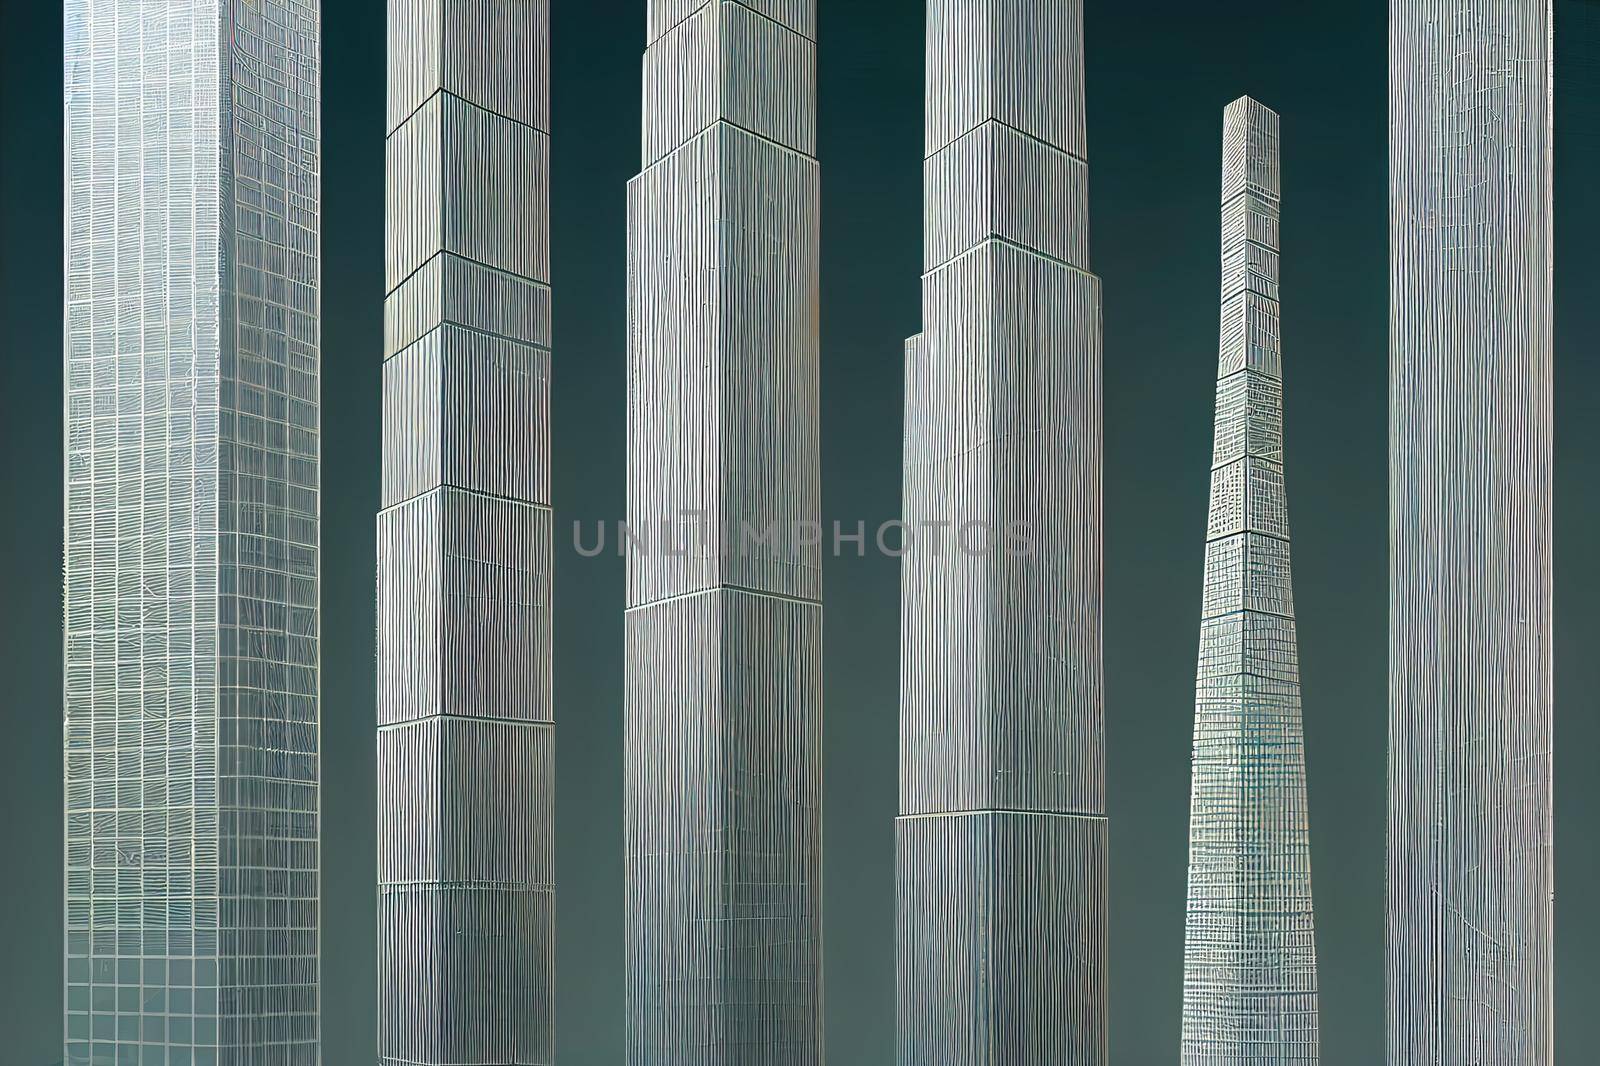 Abstract 3d city rendering with lines and digital elements. Digital skyscrappers with wire texture. Technology and connection concept. Perspective architecture background with wireframe skyscrapers.. High quality illustration